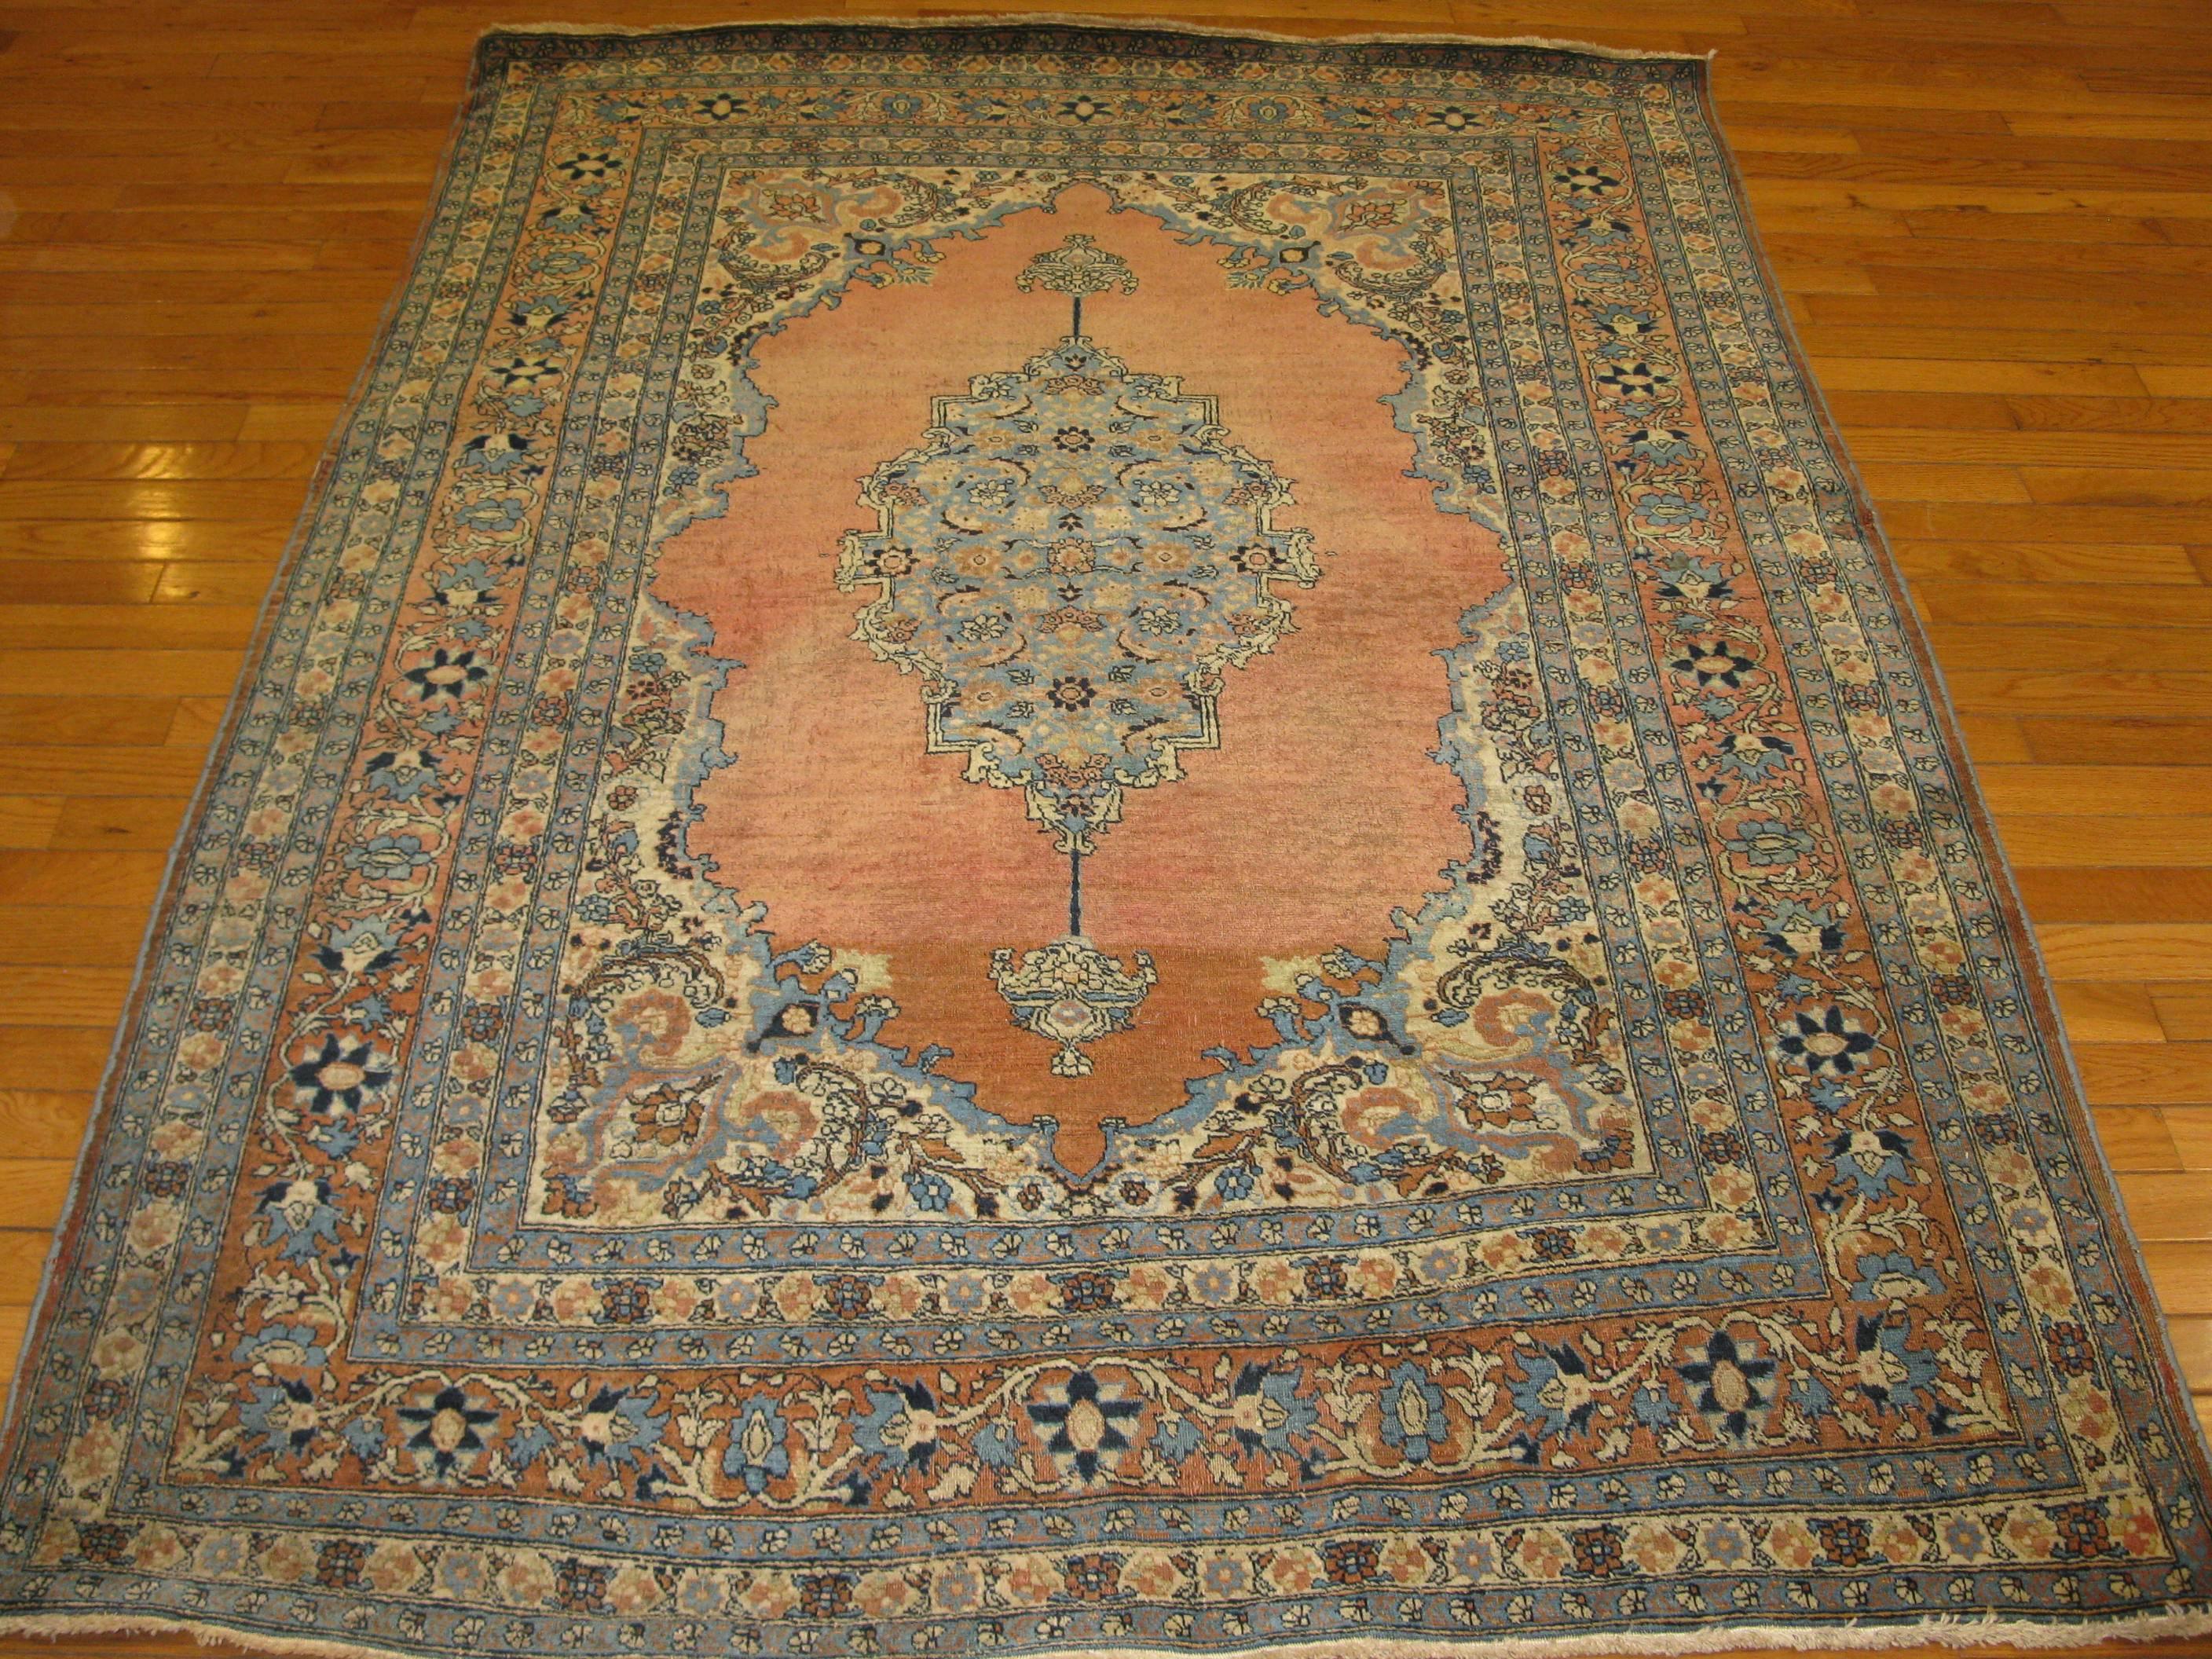 This is a beautiful hand-knotted small antique Persian Haji Jalili Tabriz rug. It has an intricate pattern on an open field in coral color background. The rug has a fine weave and measures 4' 8" x 6' 4" and in great condition.